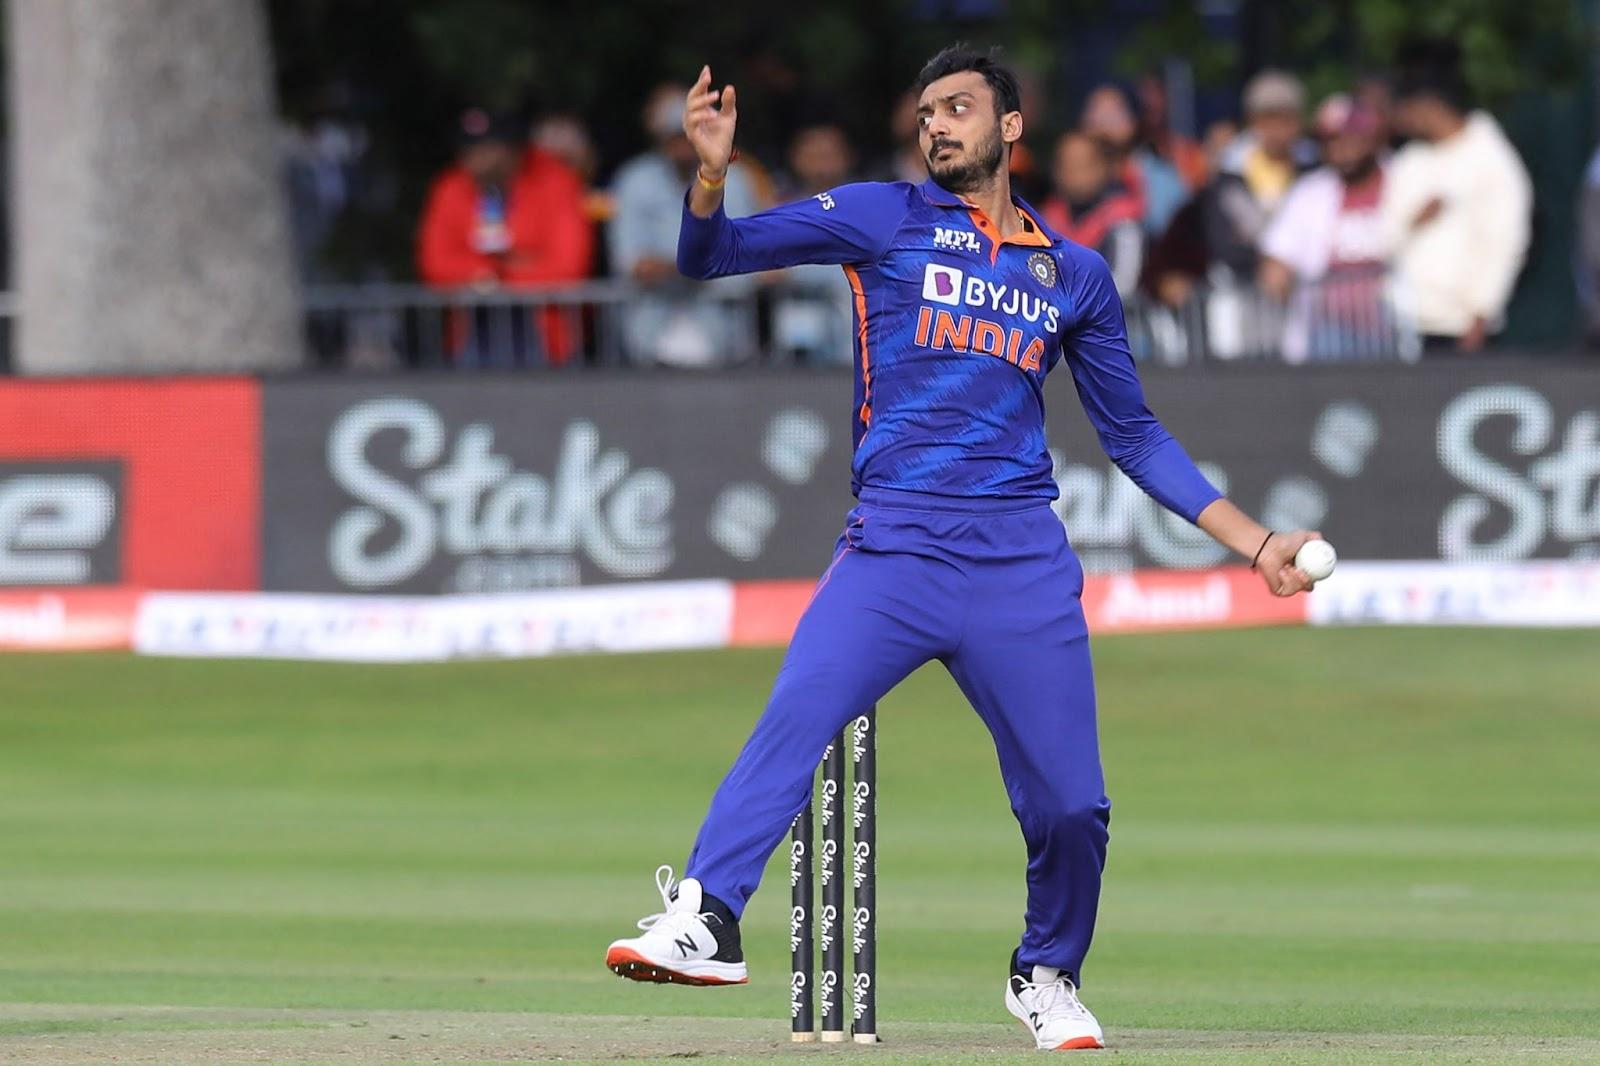 Axar Patel could give India a much-needed left-hand batting option